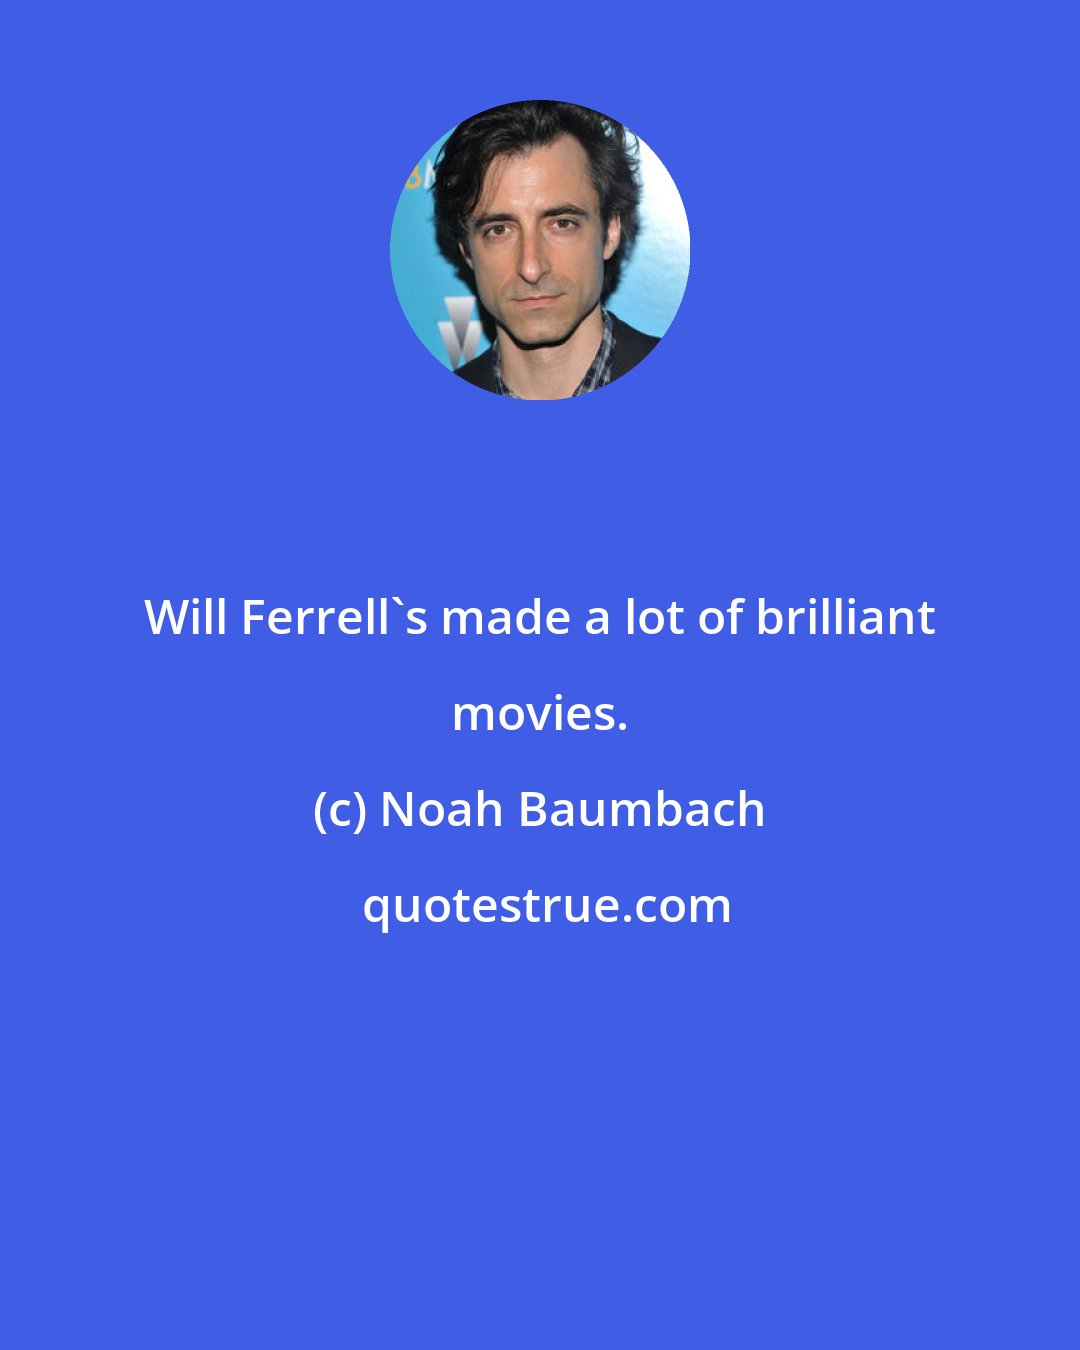 Noah Baumbach: Will Ferrell's made a lot of brilliant movies.